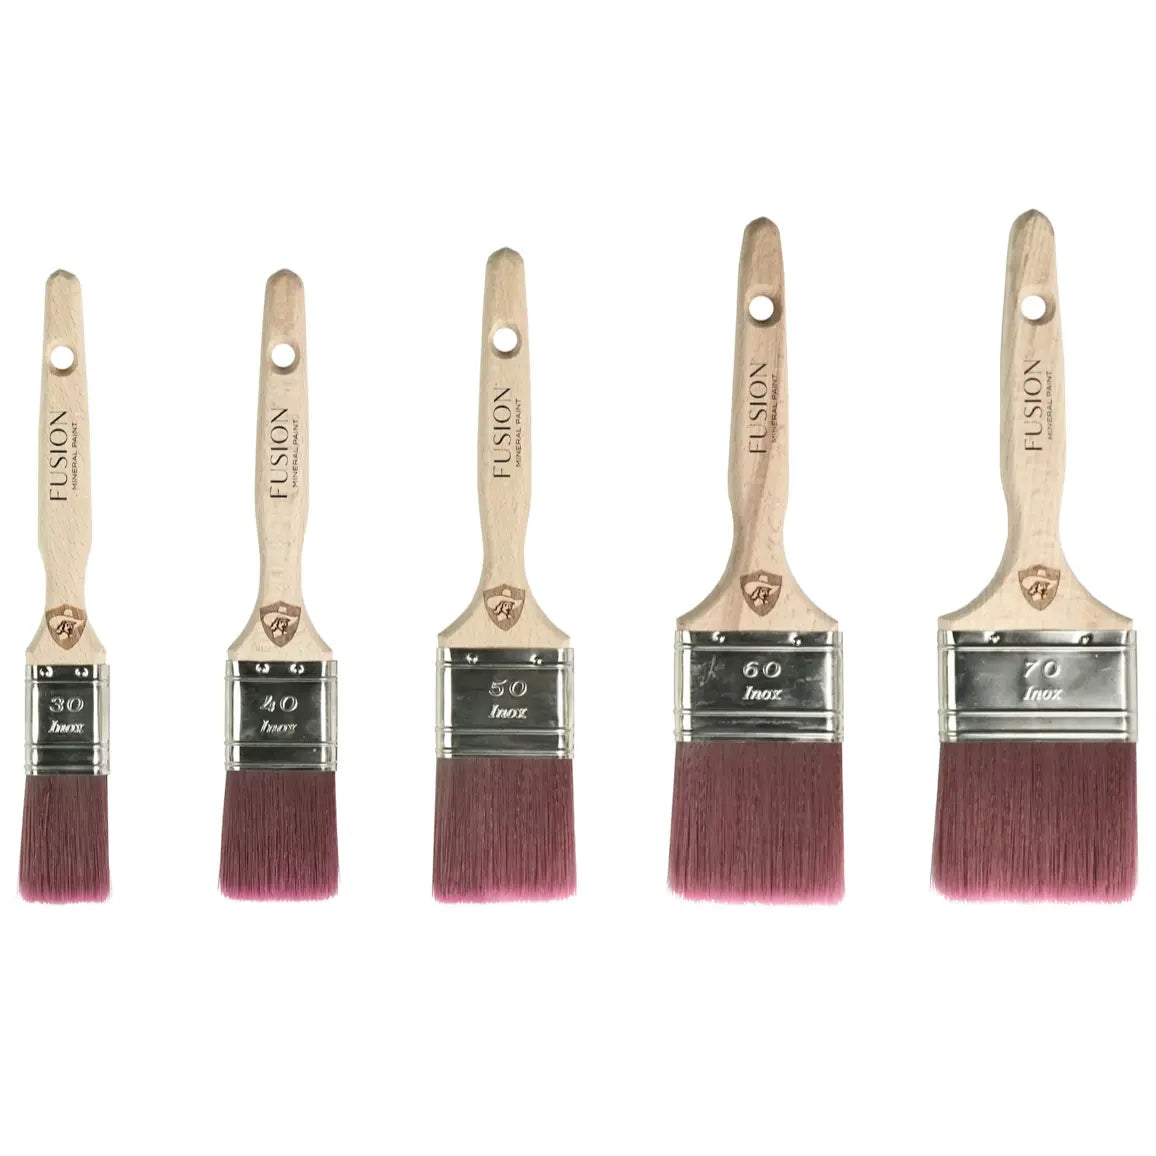 Home Smith The Pro-Hybrid Series Un-lacquered Flat Brushes Staalmeester Brushes and Tools